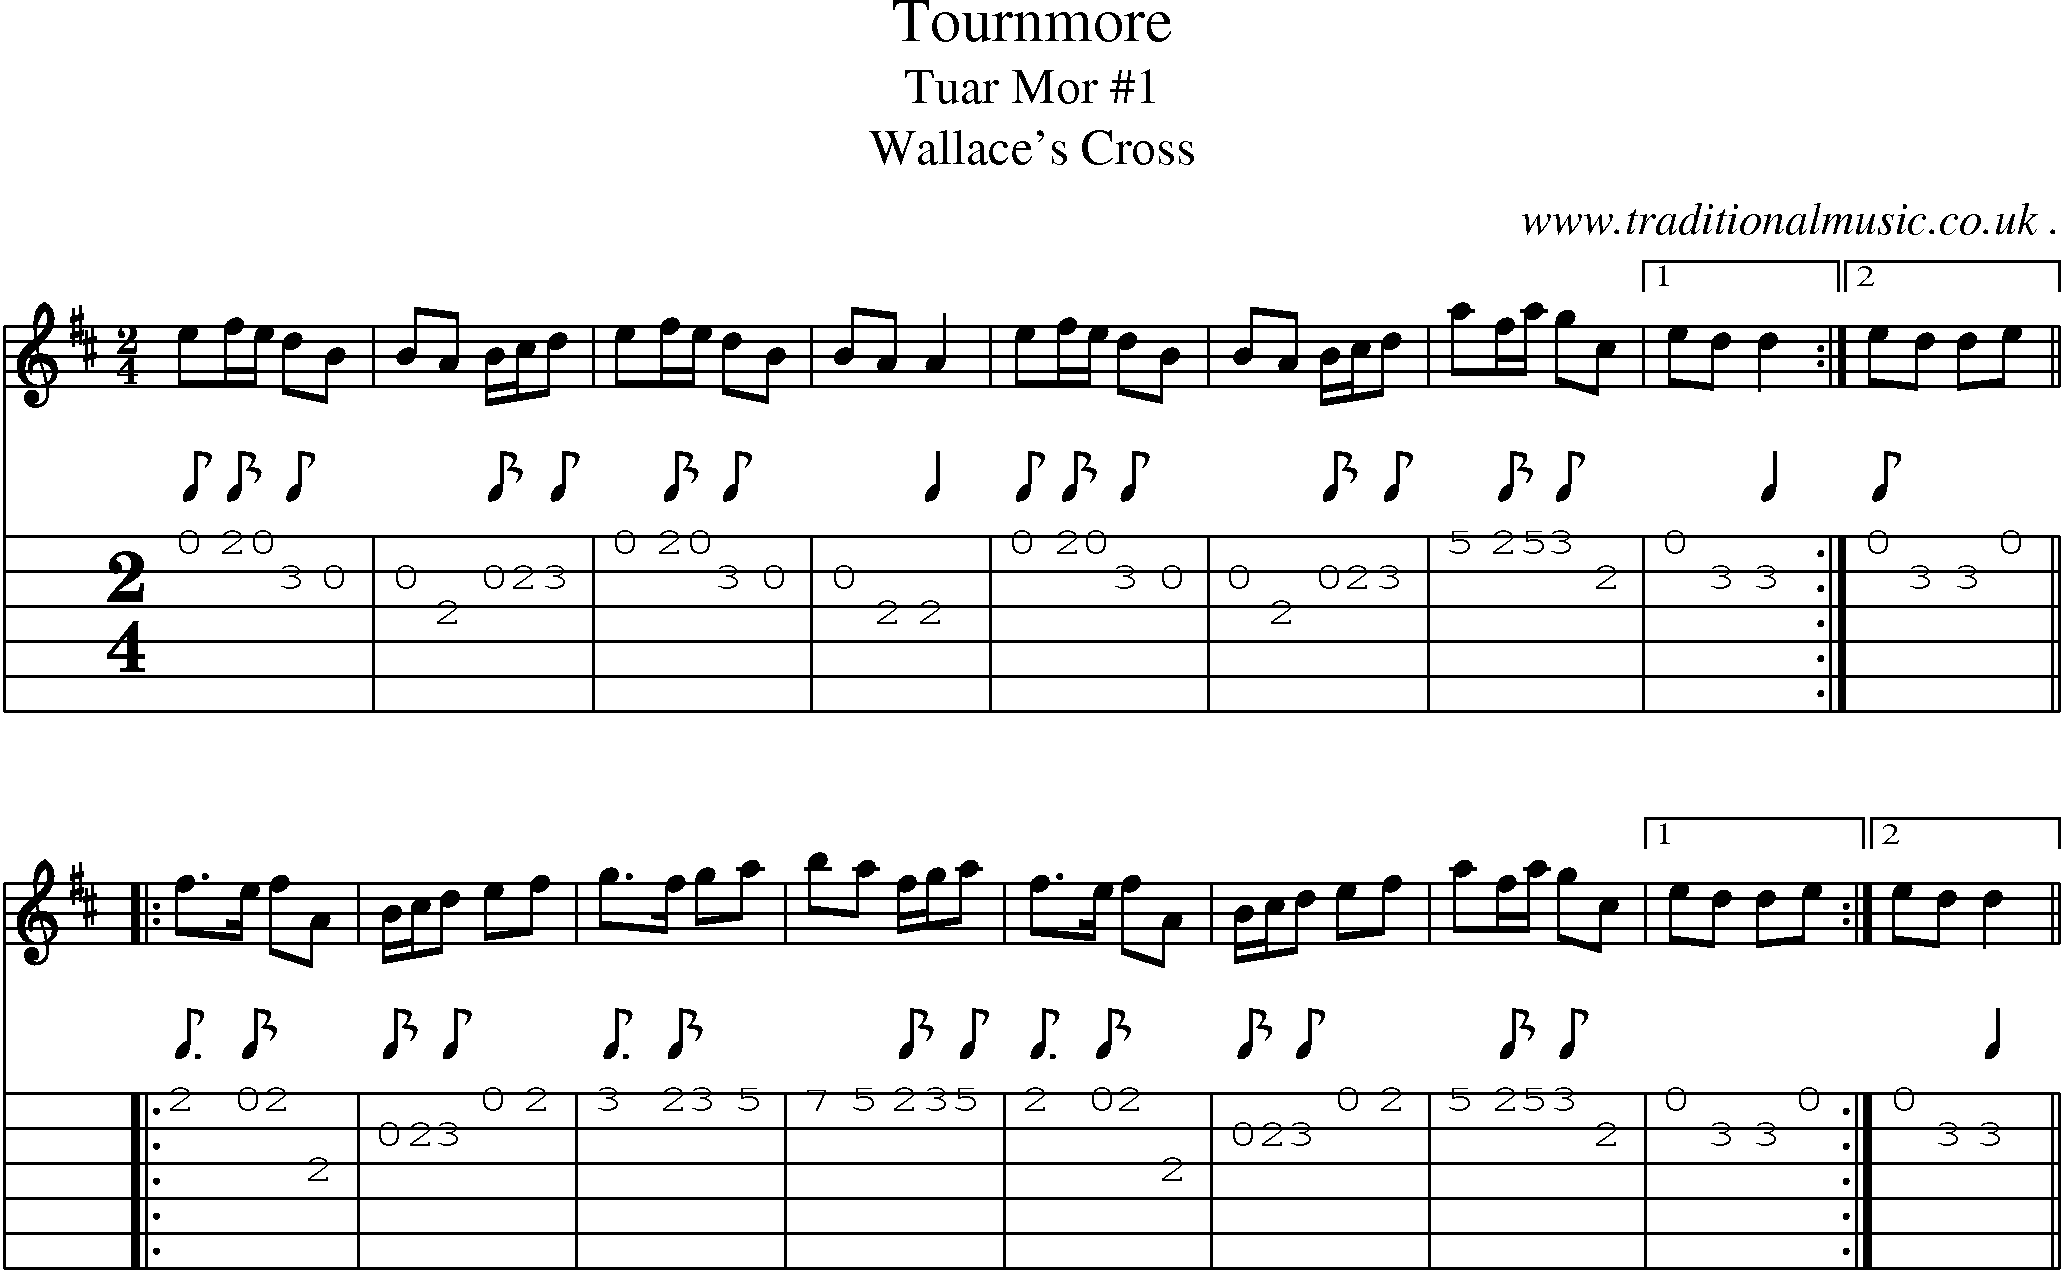 Sheet-Music and Guitar Tabs for Tournmore